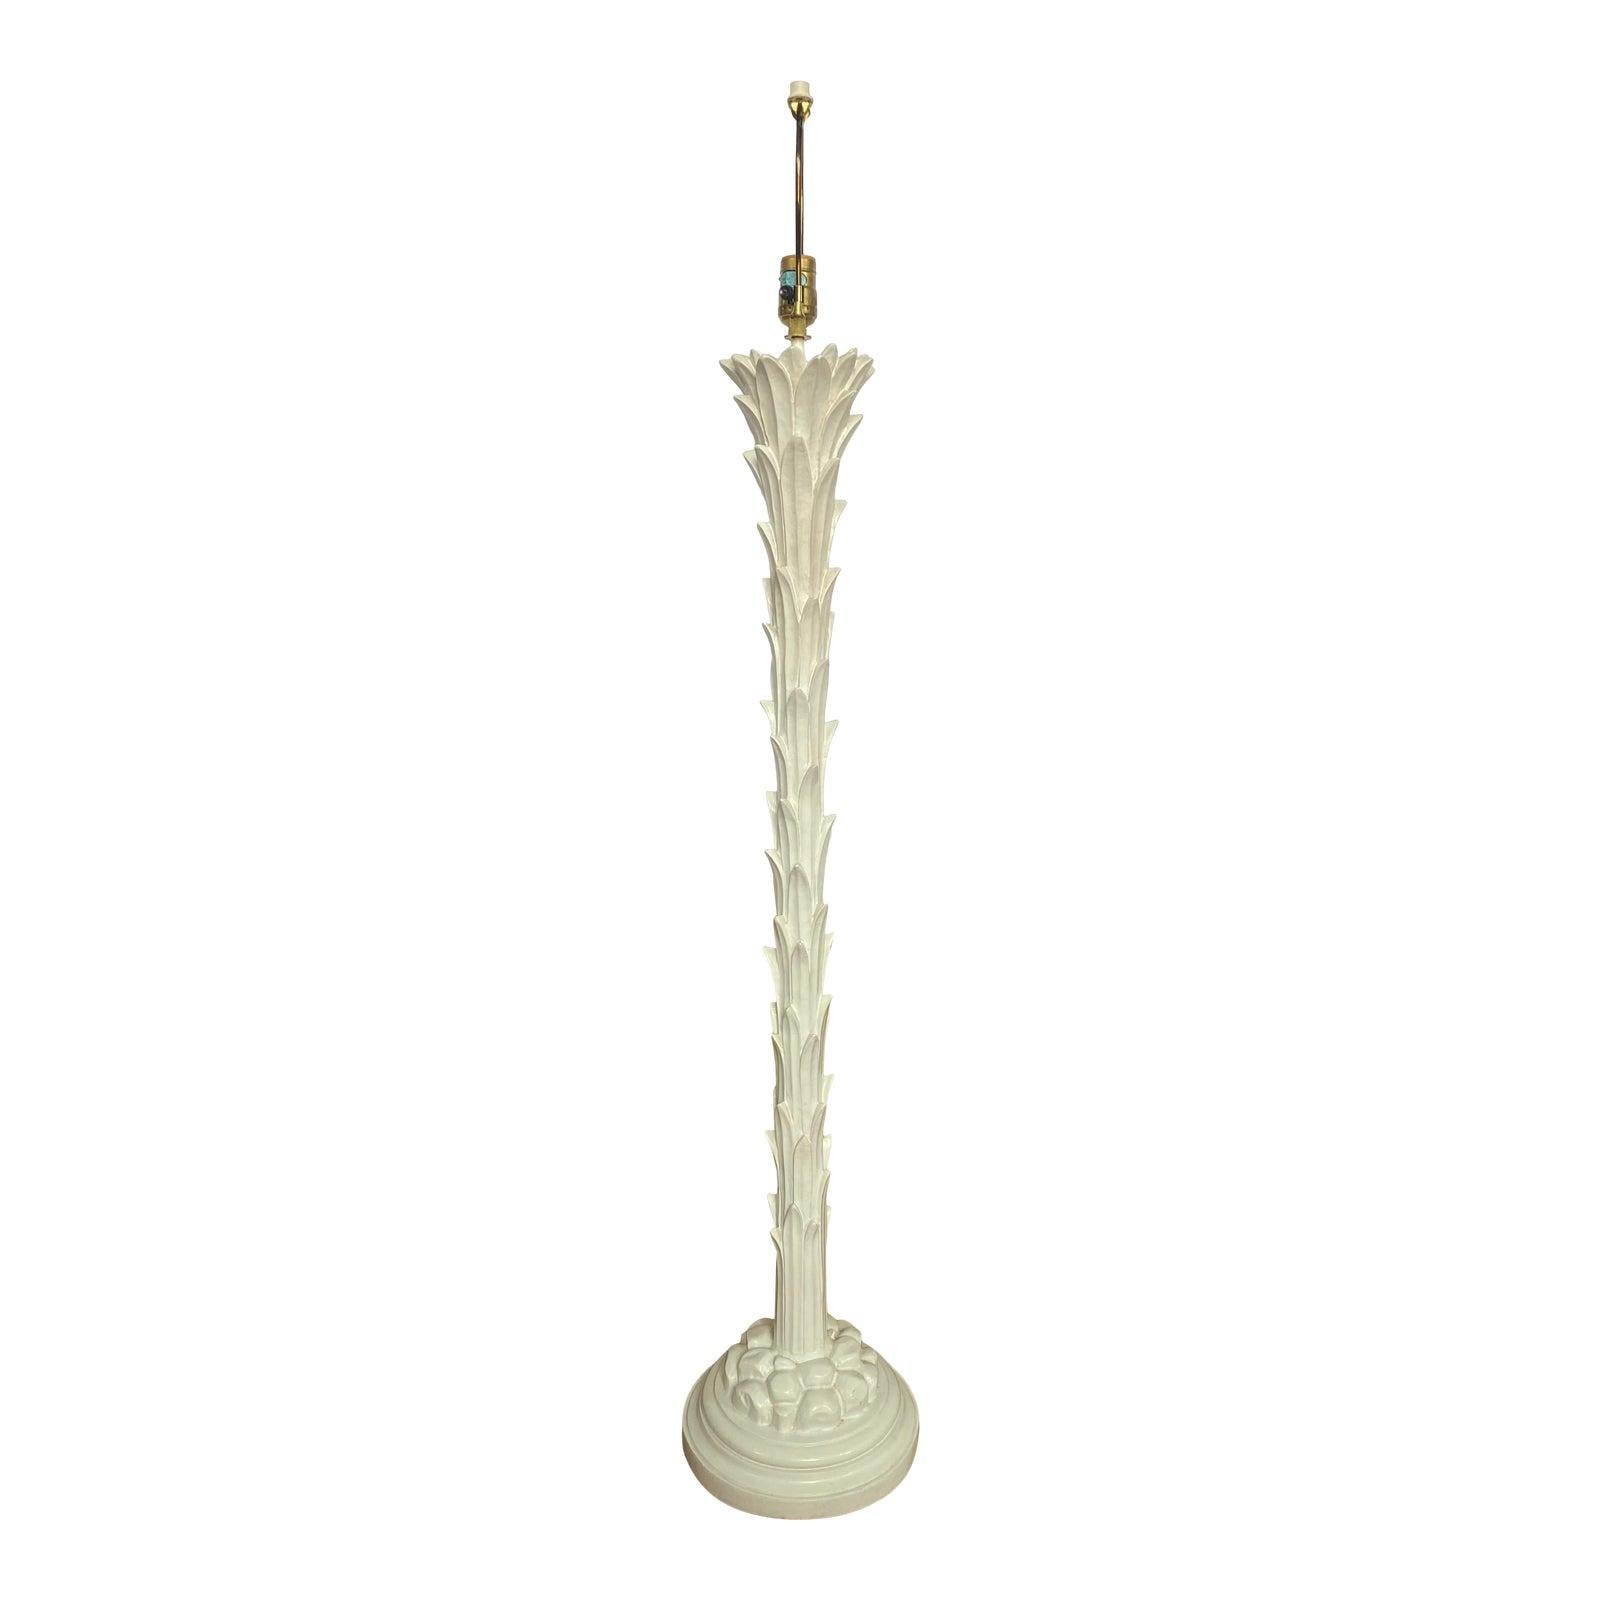 Mid-Century Modern Serge Roche style white plaster palm floor lamp by Chapman, dated 1972. This sculptural Hollywood Regency style lamp features original antique plaster white finish over wood. Original Chapman label attached to socket. Lamp shade